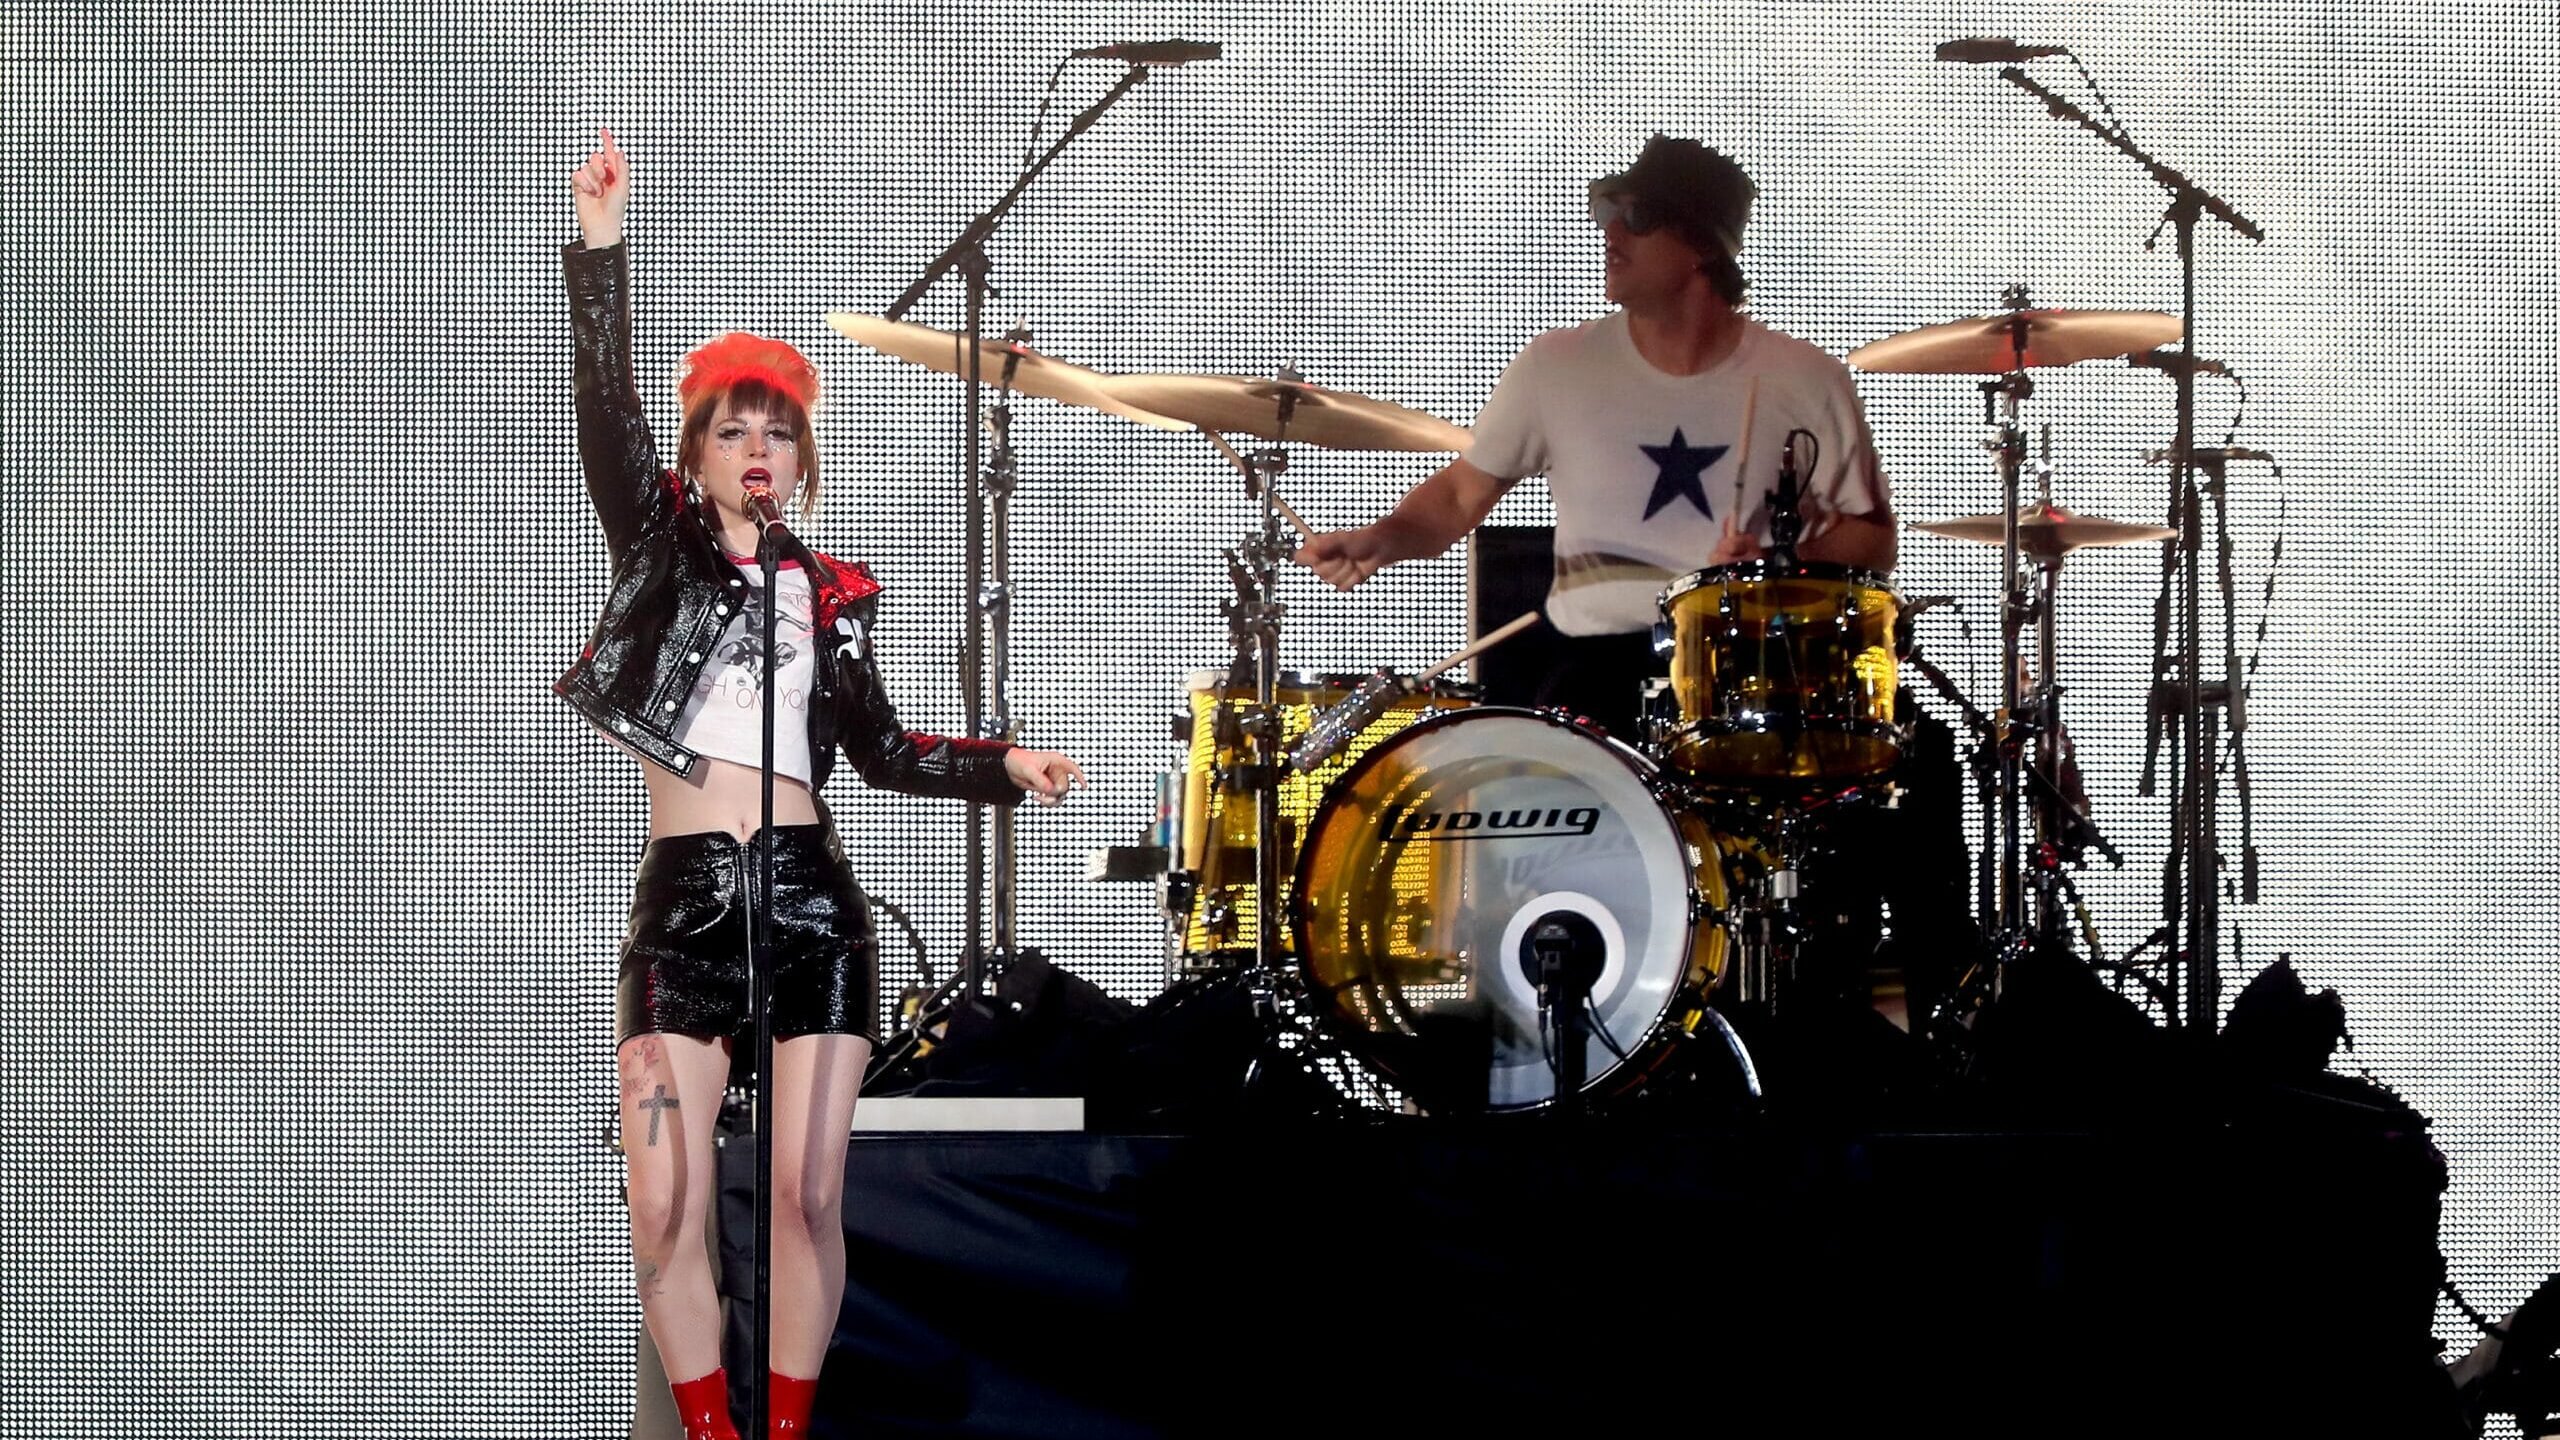 GLENDALE, ARIZONA - MARCH 17: Editorial use only and no commercial use at any time. No use on publication covers is permitted after August 9, 2023. (L-R) Hayley Williams and Zac Farro of Paramore perform onstage for the opening night of "Taylor Swift | The Eras Tour" at State Farm Stadium on March 17, 2023 in Glendale, Arizona. The city of Glendale, Arizona was ceremonially renamed to Swift City for March 17-18 in honor of The Eras Tour.